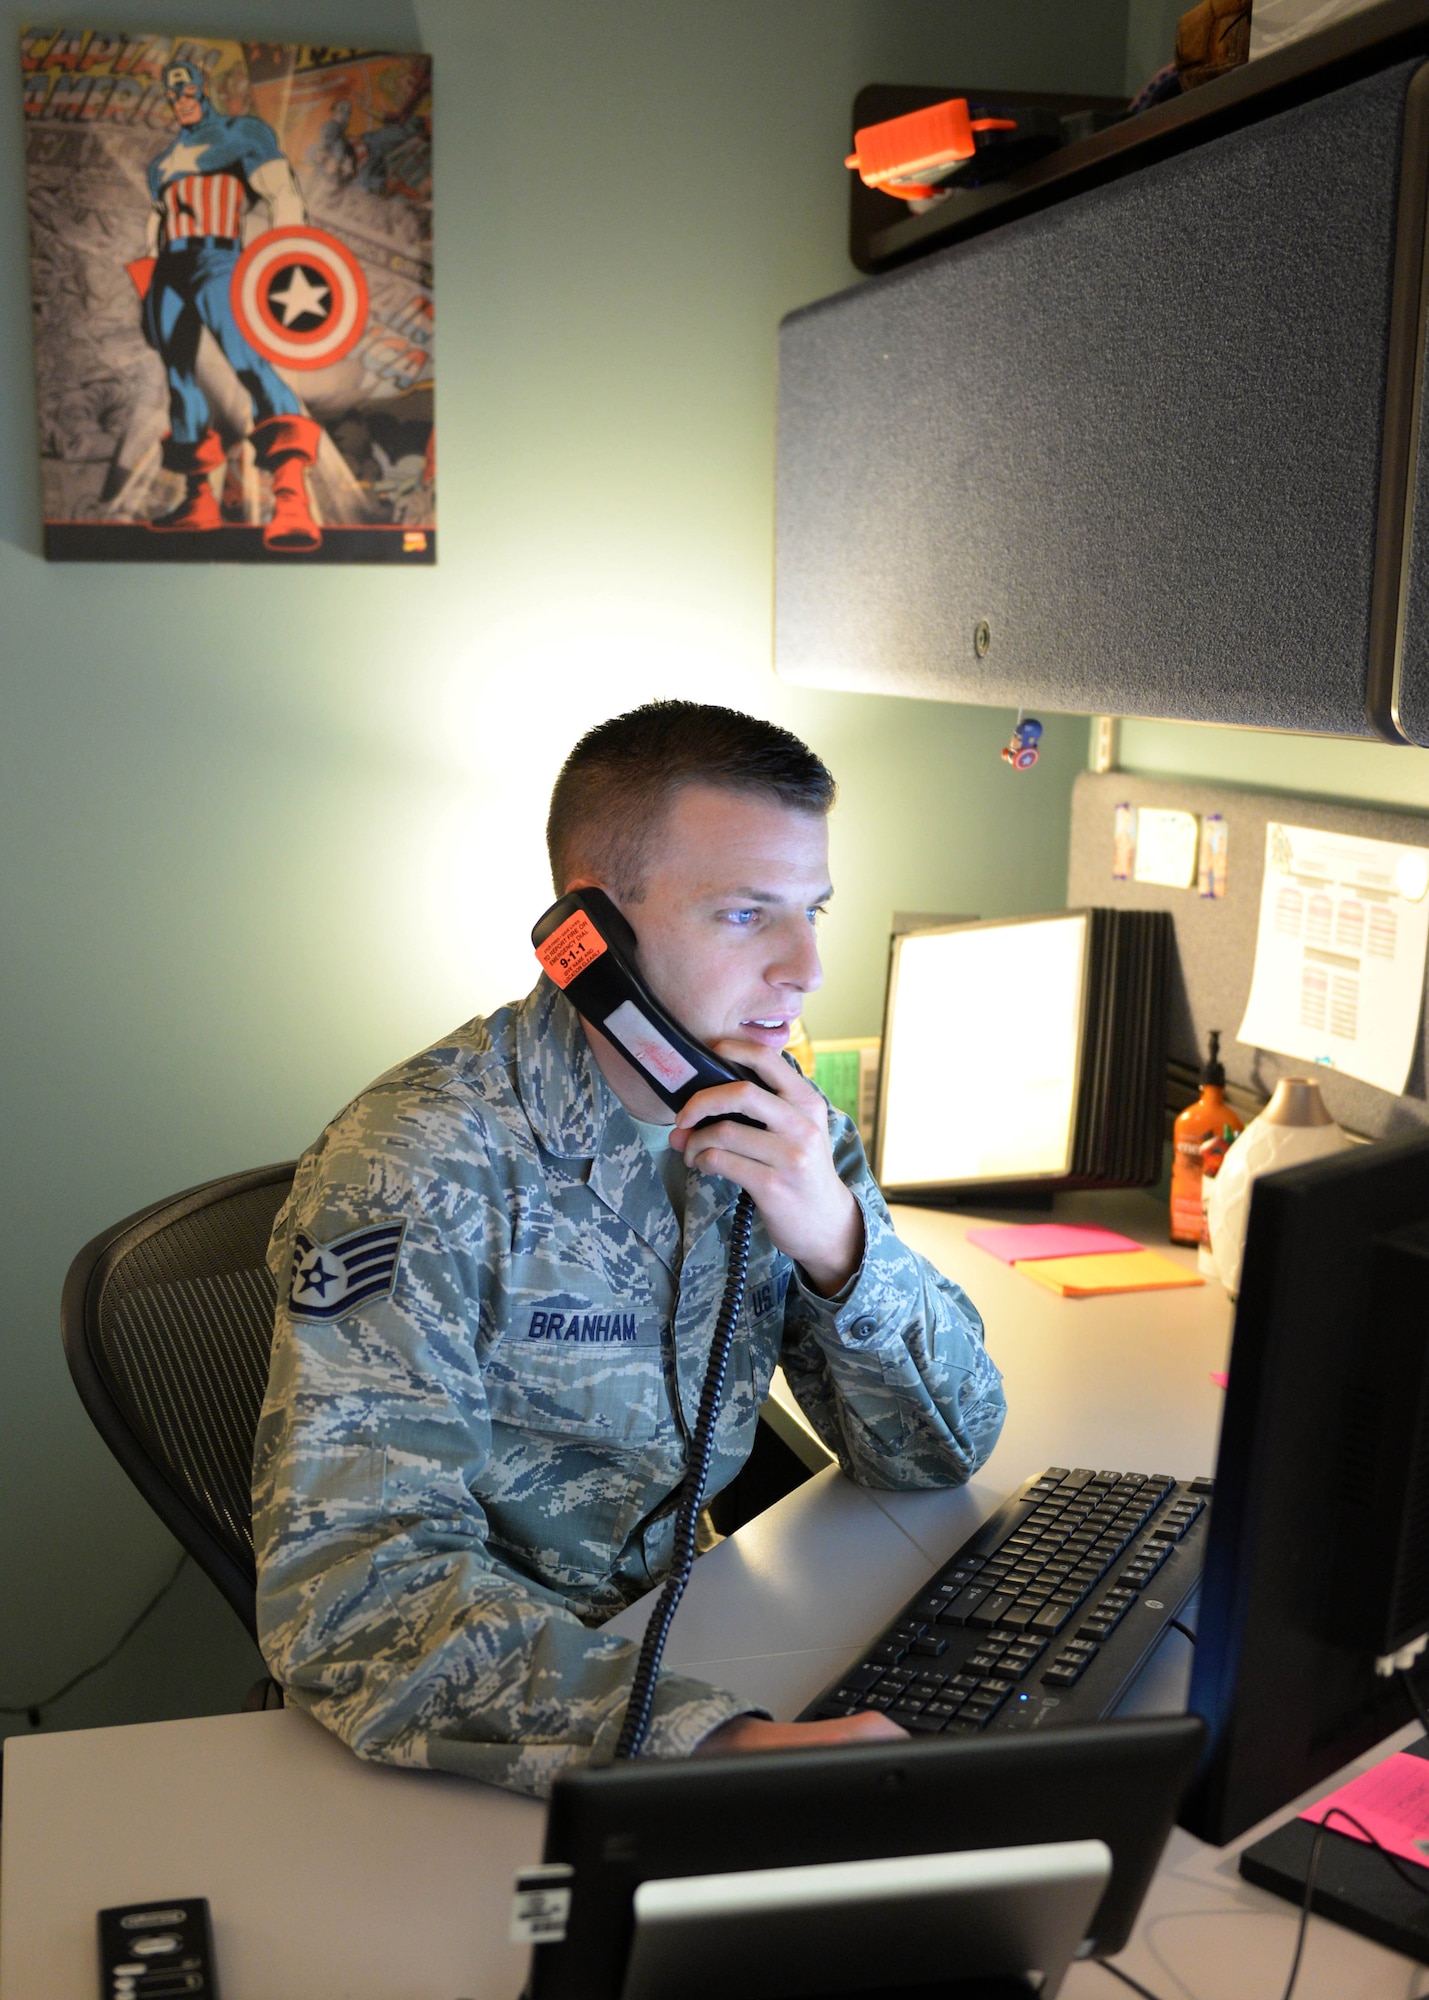 U.S. Air Force Staff Sgt. Adam Branham, Preventative Health Cell noncommissioned officer in charge, 673d Aerospace Medicine Squadron, answers the phone at Joint Base Elmendorf-Richardson, Alaska, Nov. 30, 2017. At JBER, the Preventative Health Assessment Cell monitors and tracks those who have completed the PHA questionnaire and is notified when the mental health assessment is scheduled and completed.